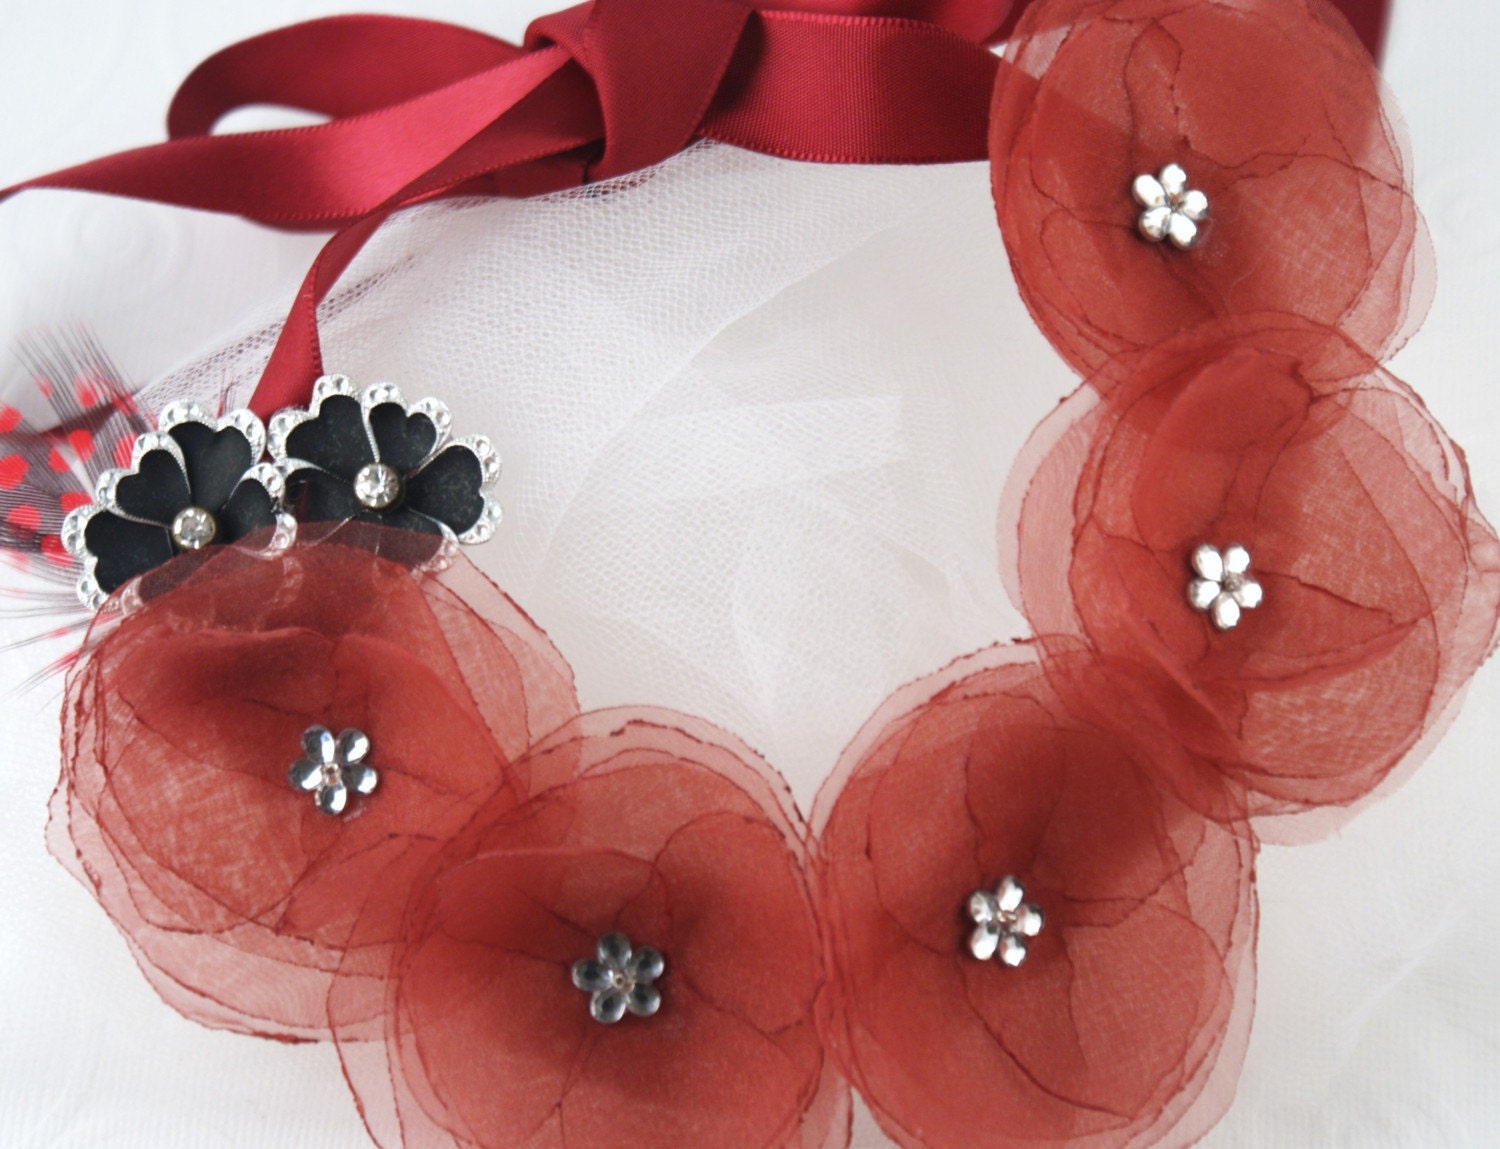 ON SALE- Harmony - Statement Bib Necklace with Handmade Organza Flowers, Repurposed Vintage Brooches and Plumes